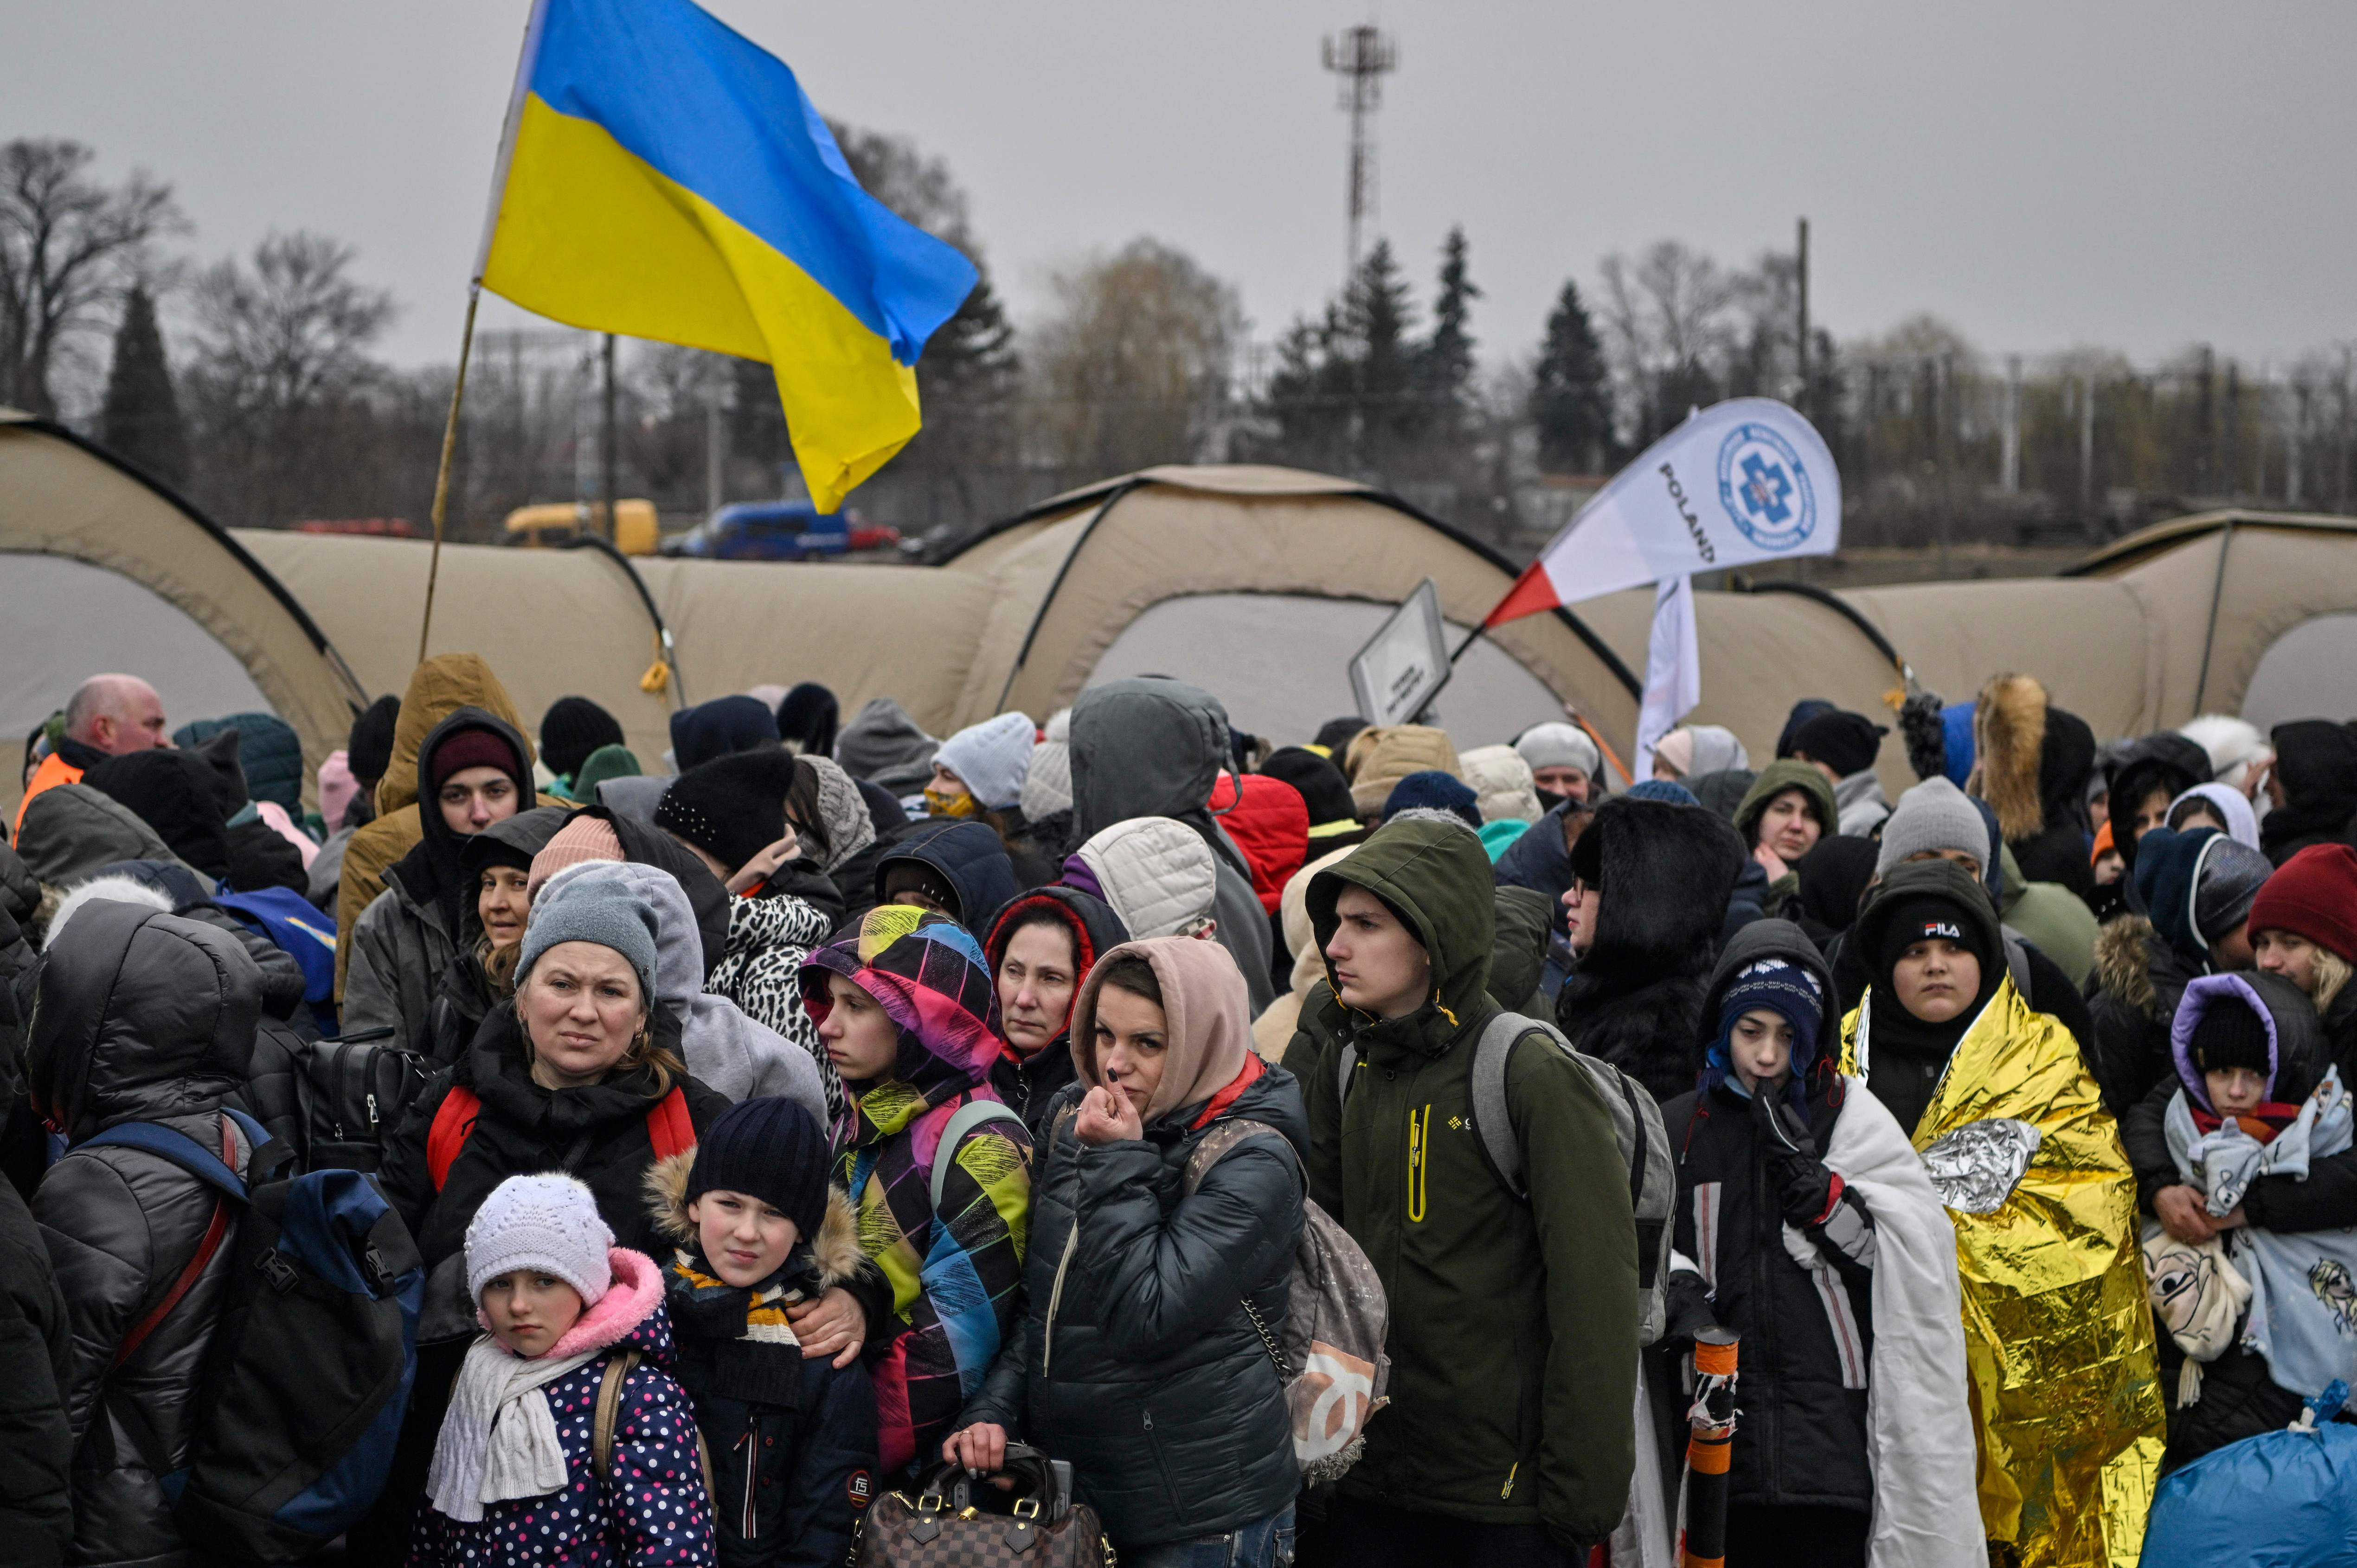 Hundreds of refugees stand in line as they wait to be transferred after crossing the Ukrainian border into Poland, at the Medyka border crossing in Poland, on March 7, 2022